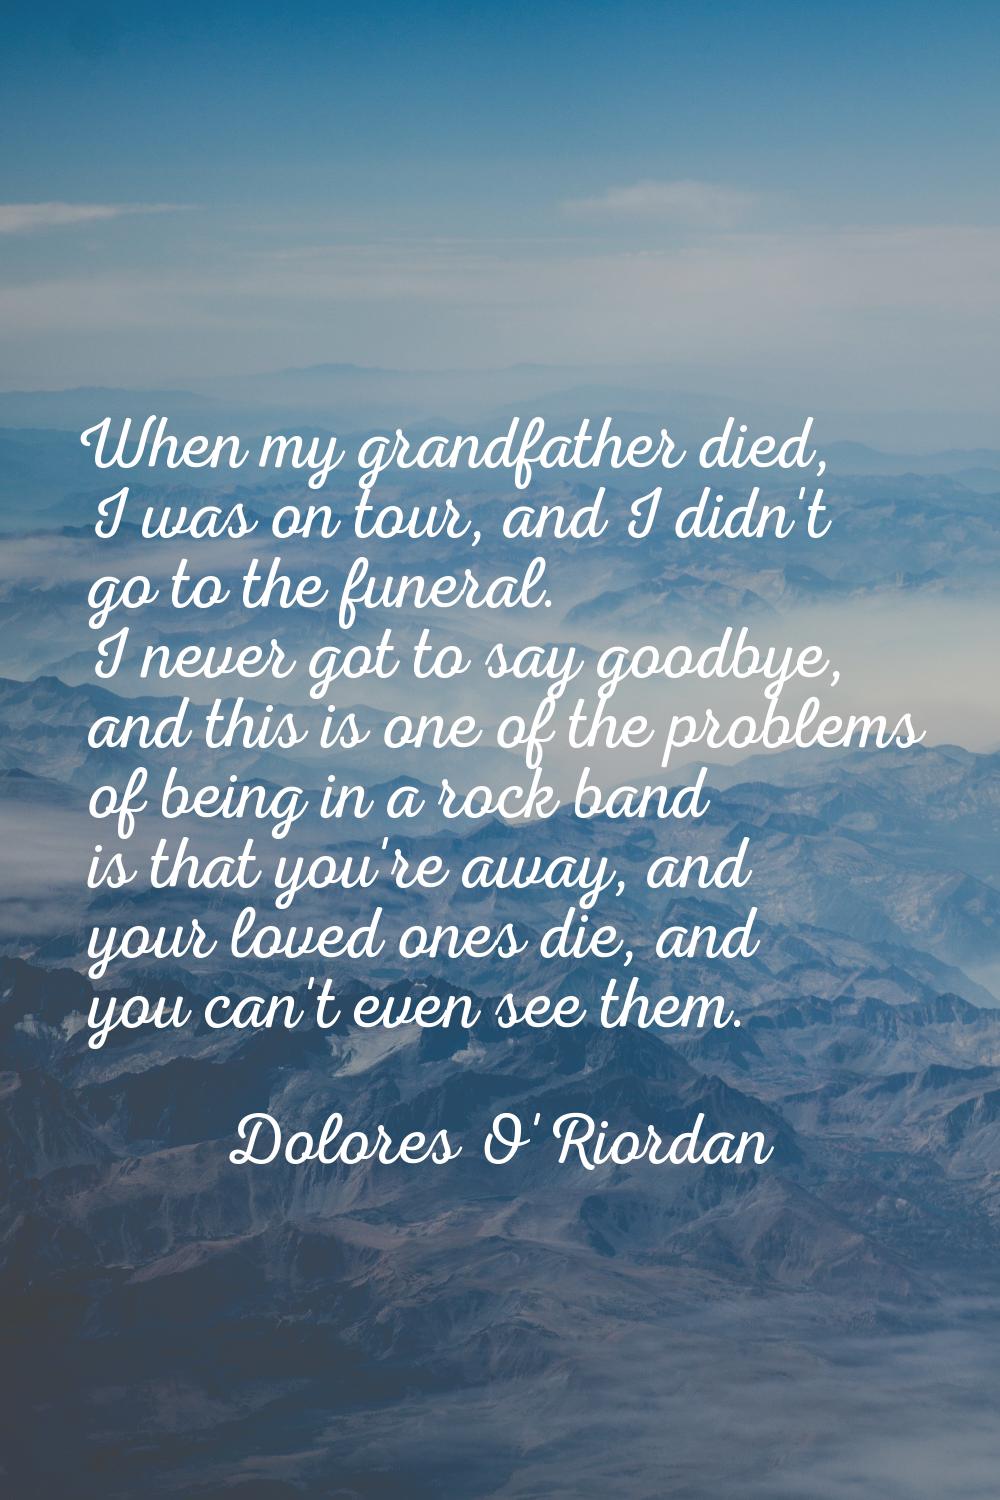 When my grandfather died, I was on tour, and I didn't go to the funeral. I never got to say goodbye